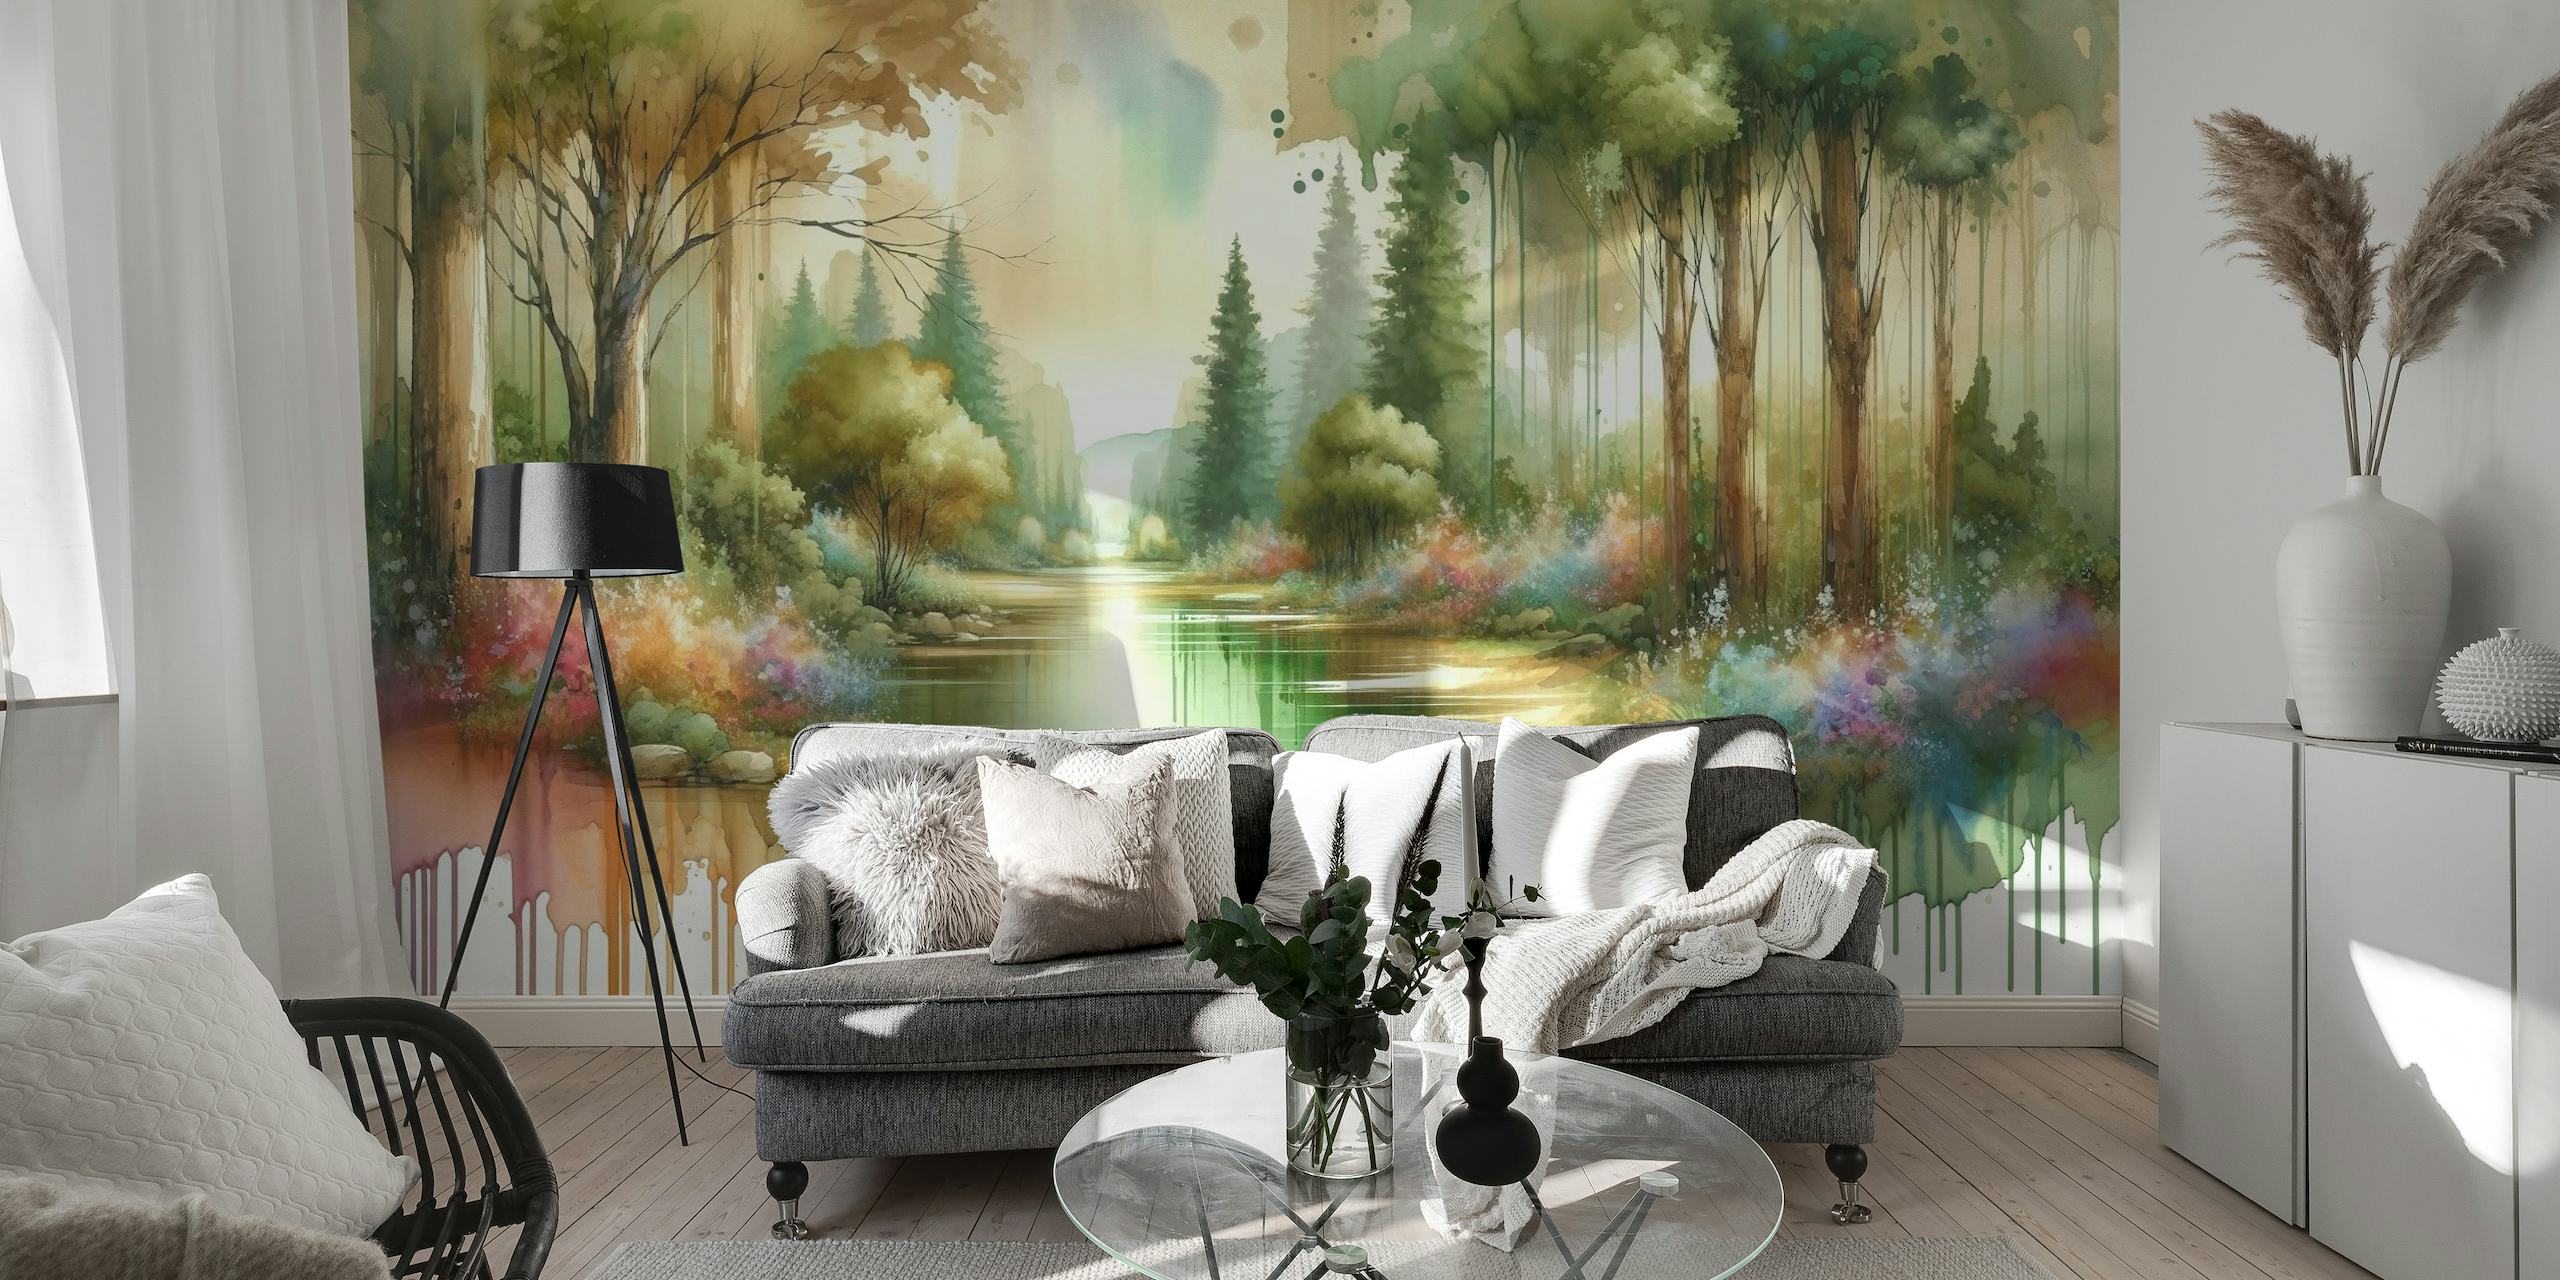 Dreamy watercolor forest scene with a reflective lake and colorful flora